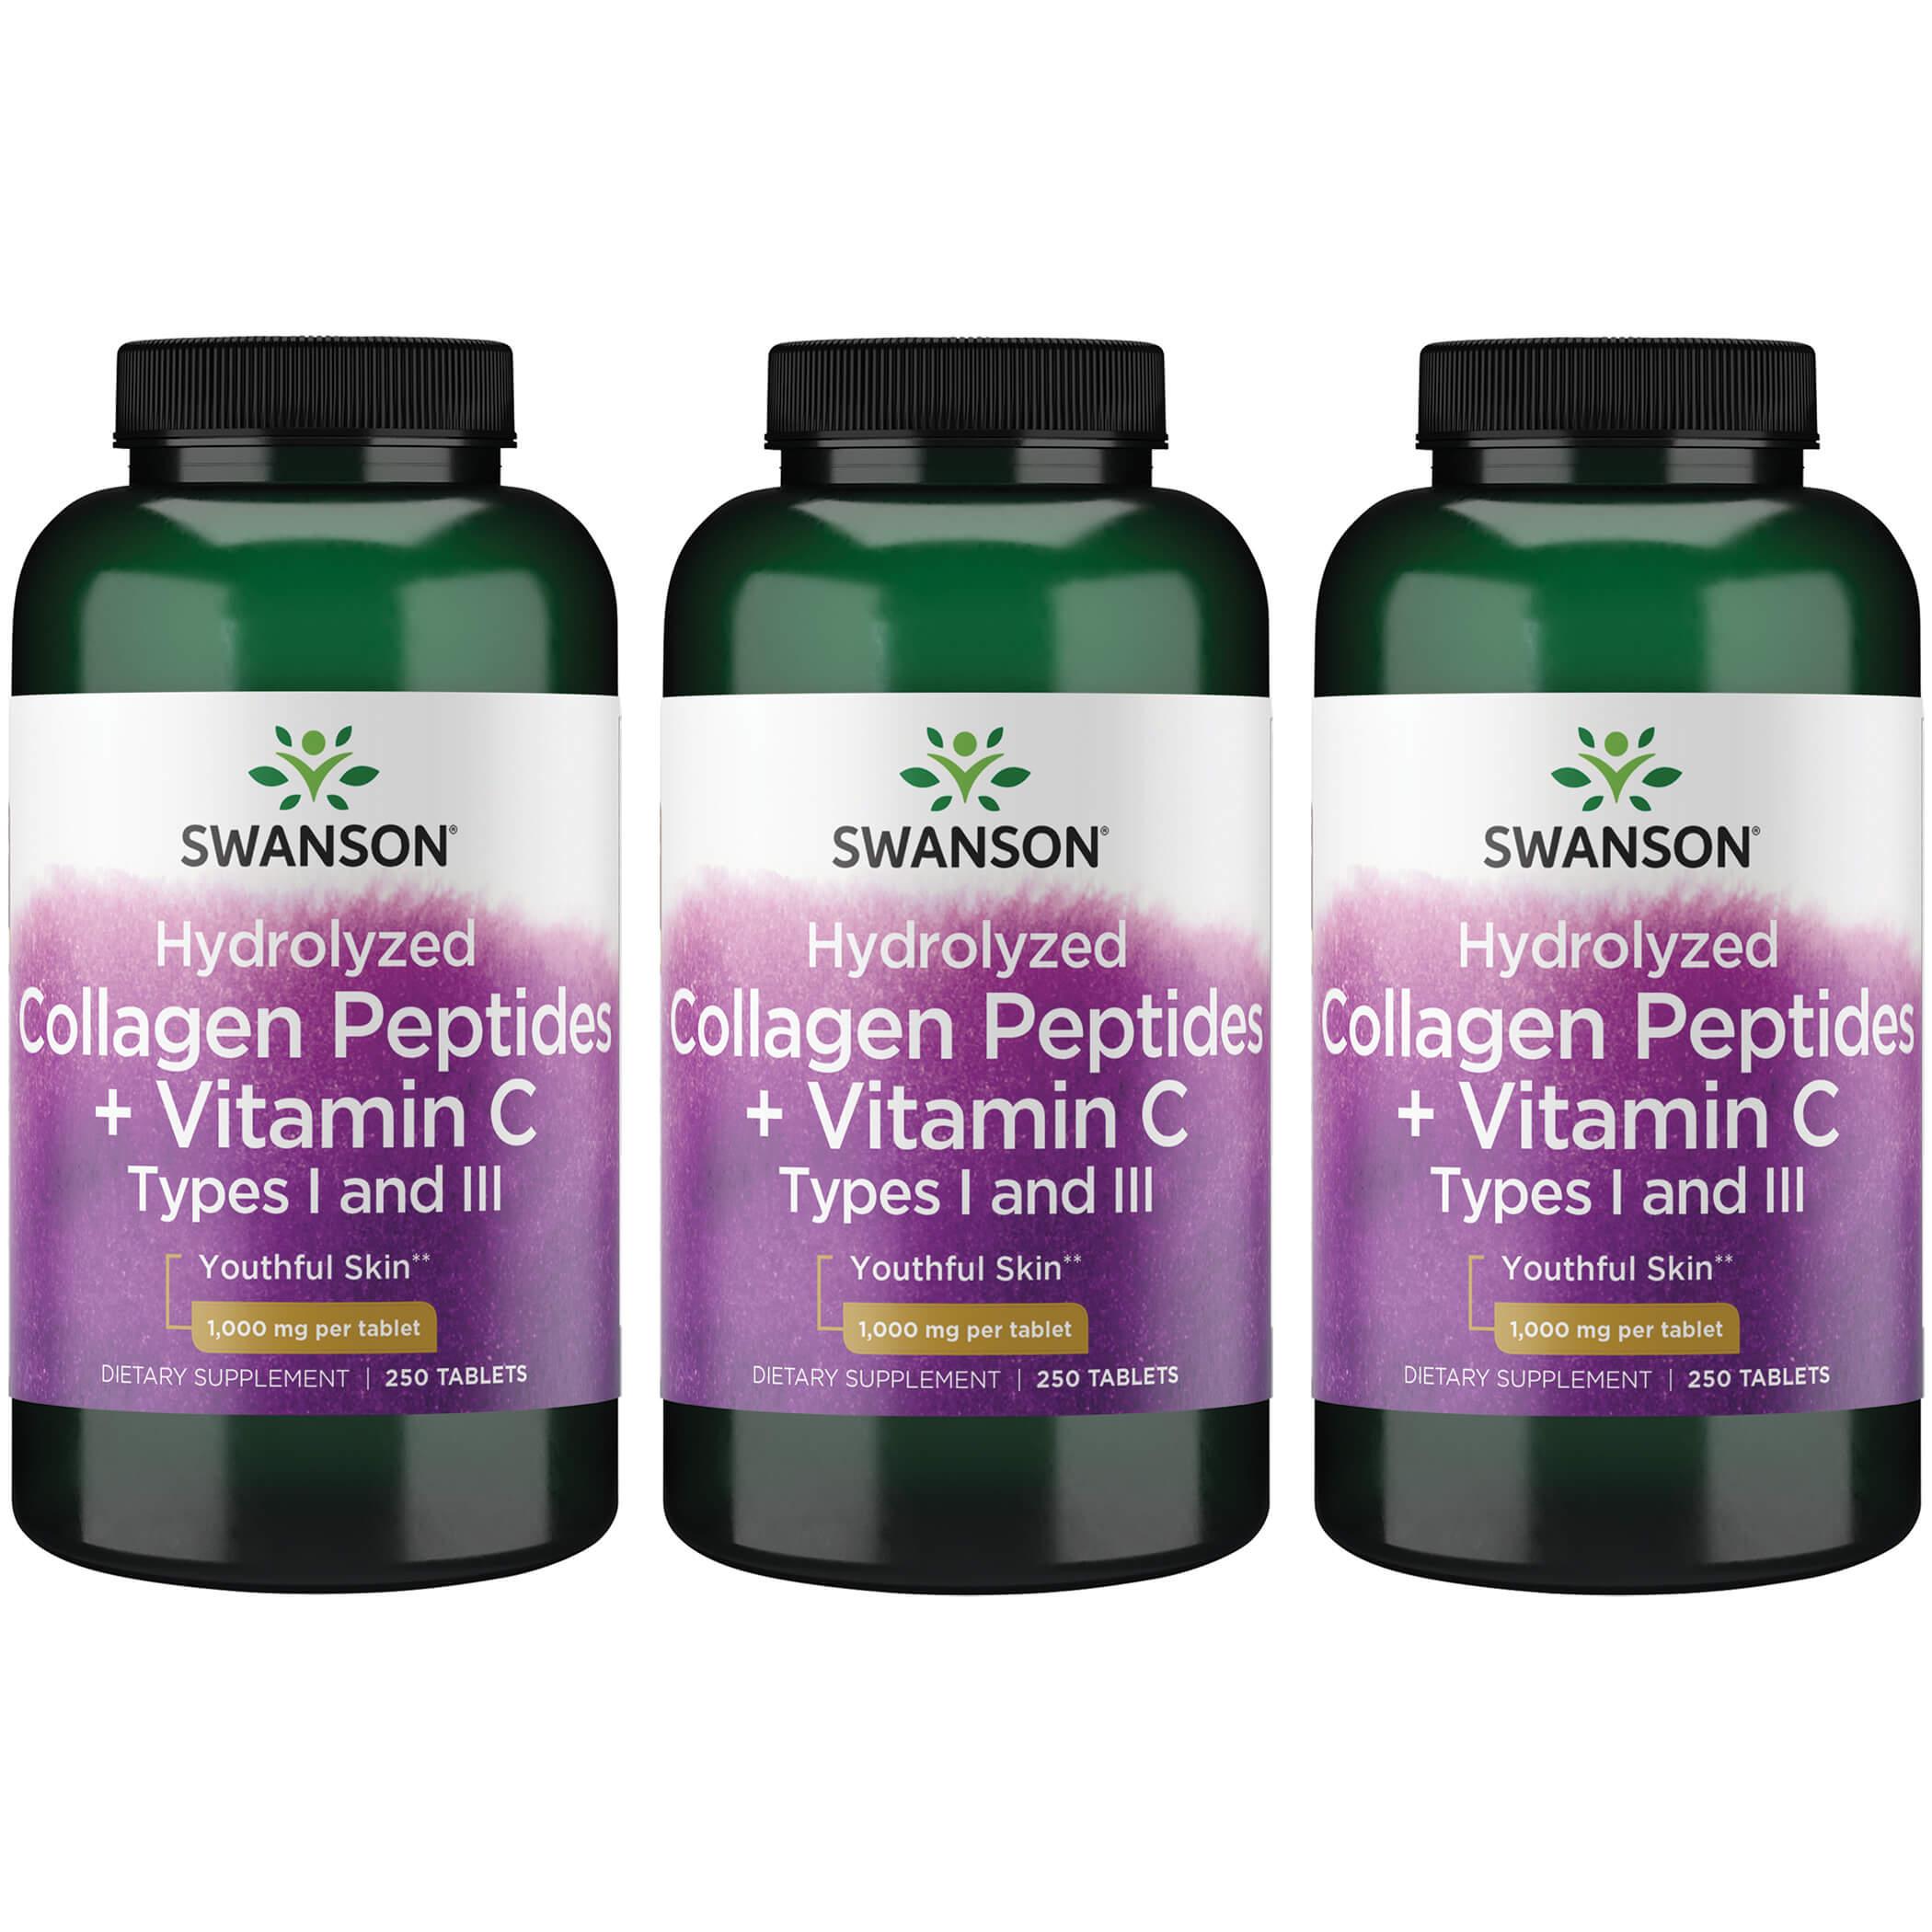 Swanson Premium Hydrolyzed Collagen Peptides + Vitamin C Types I and Iii 3 Pack 1000 mg 250 Tabs